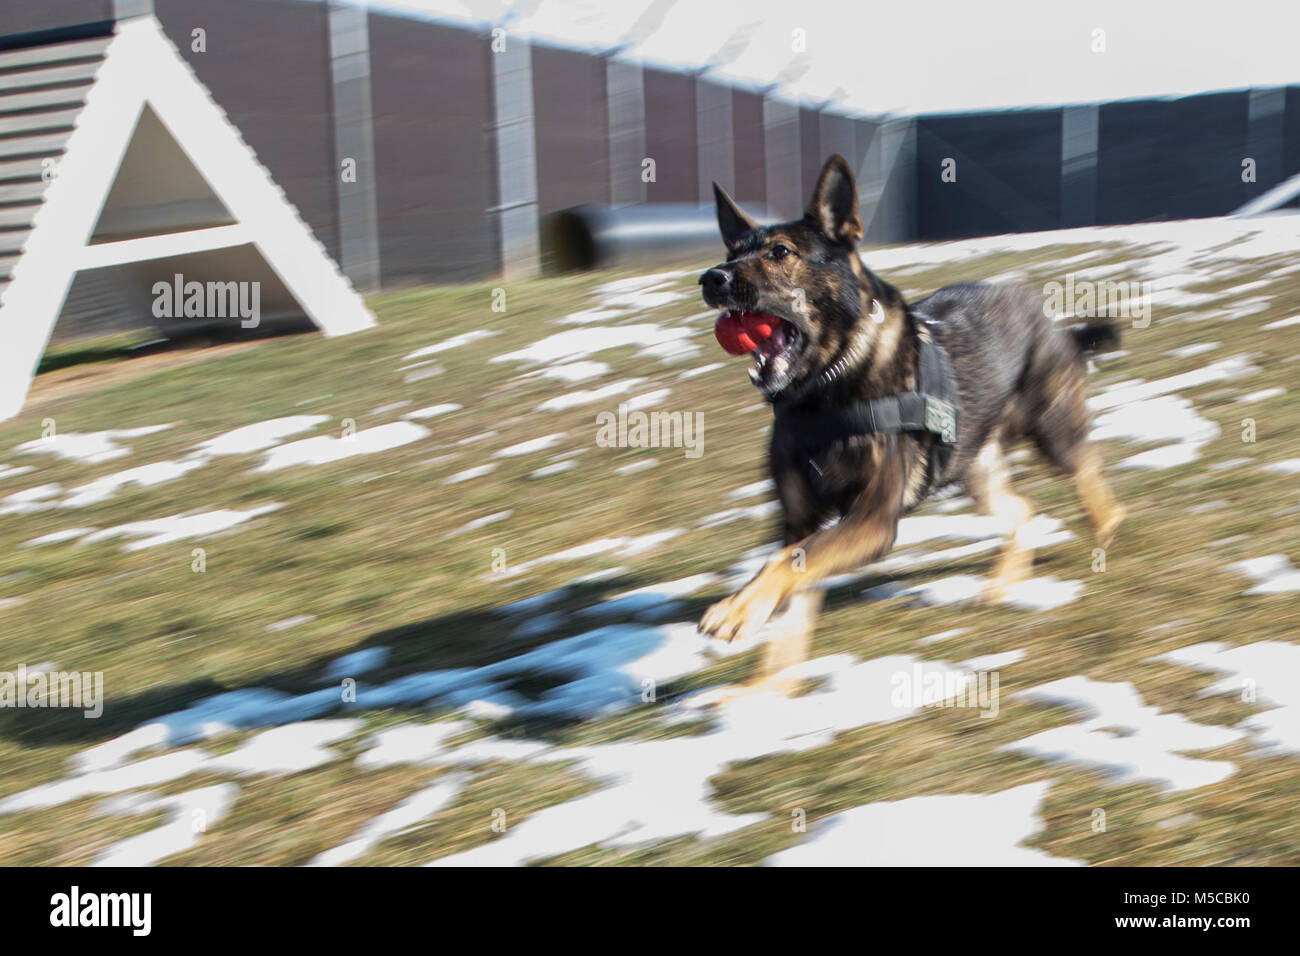 Sgt. Hundi, a military working dog of KFOR Multinational Battle Group-East, Task Force Military Police, runs with a toy in his mouth that he retrieved during a MWD demonstration, Jan. 31, 2018, on Camp Bondsteel, Kosovo. (U.S. Army Stock Photo